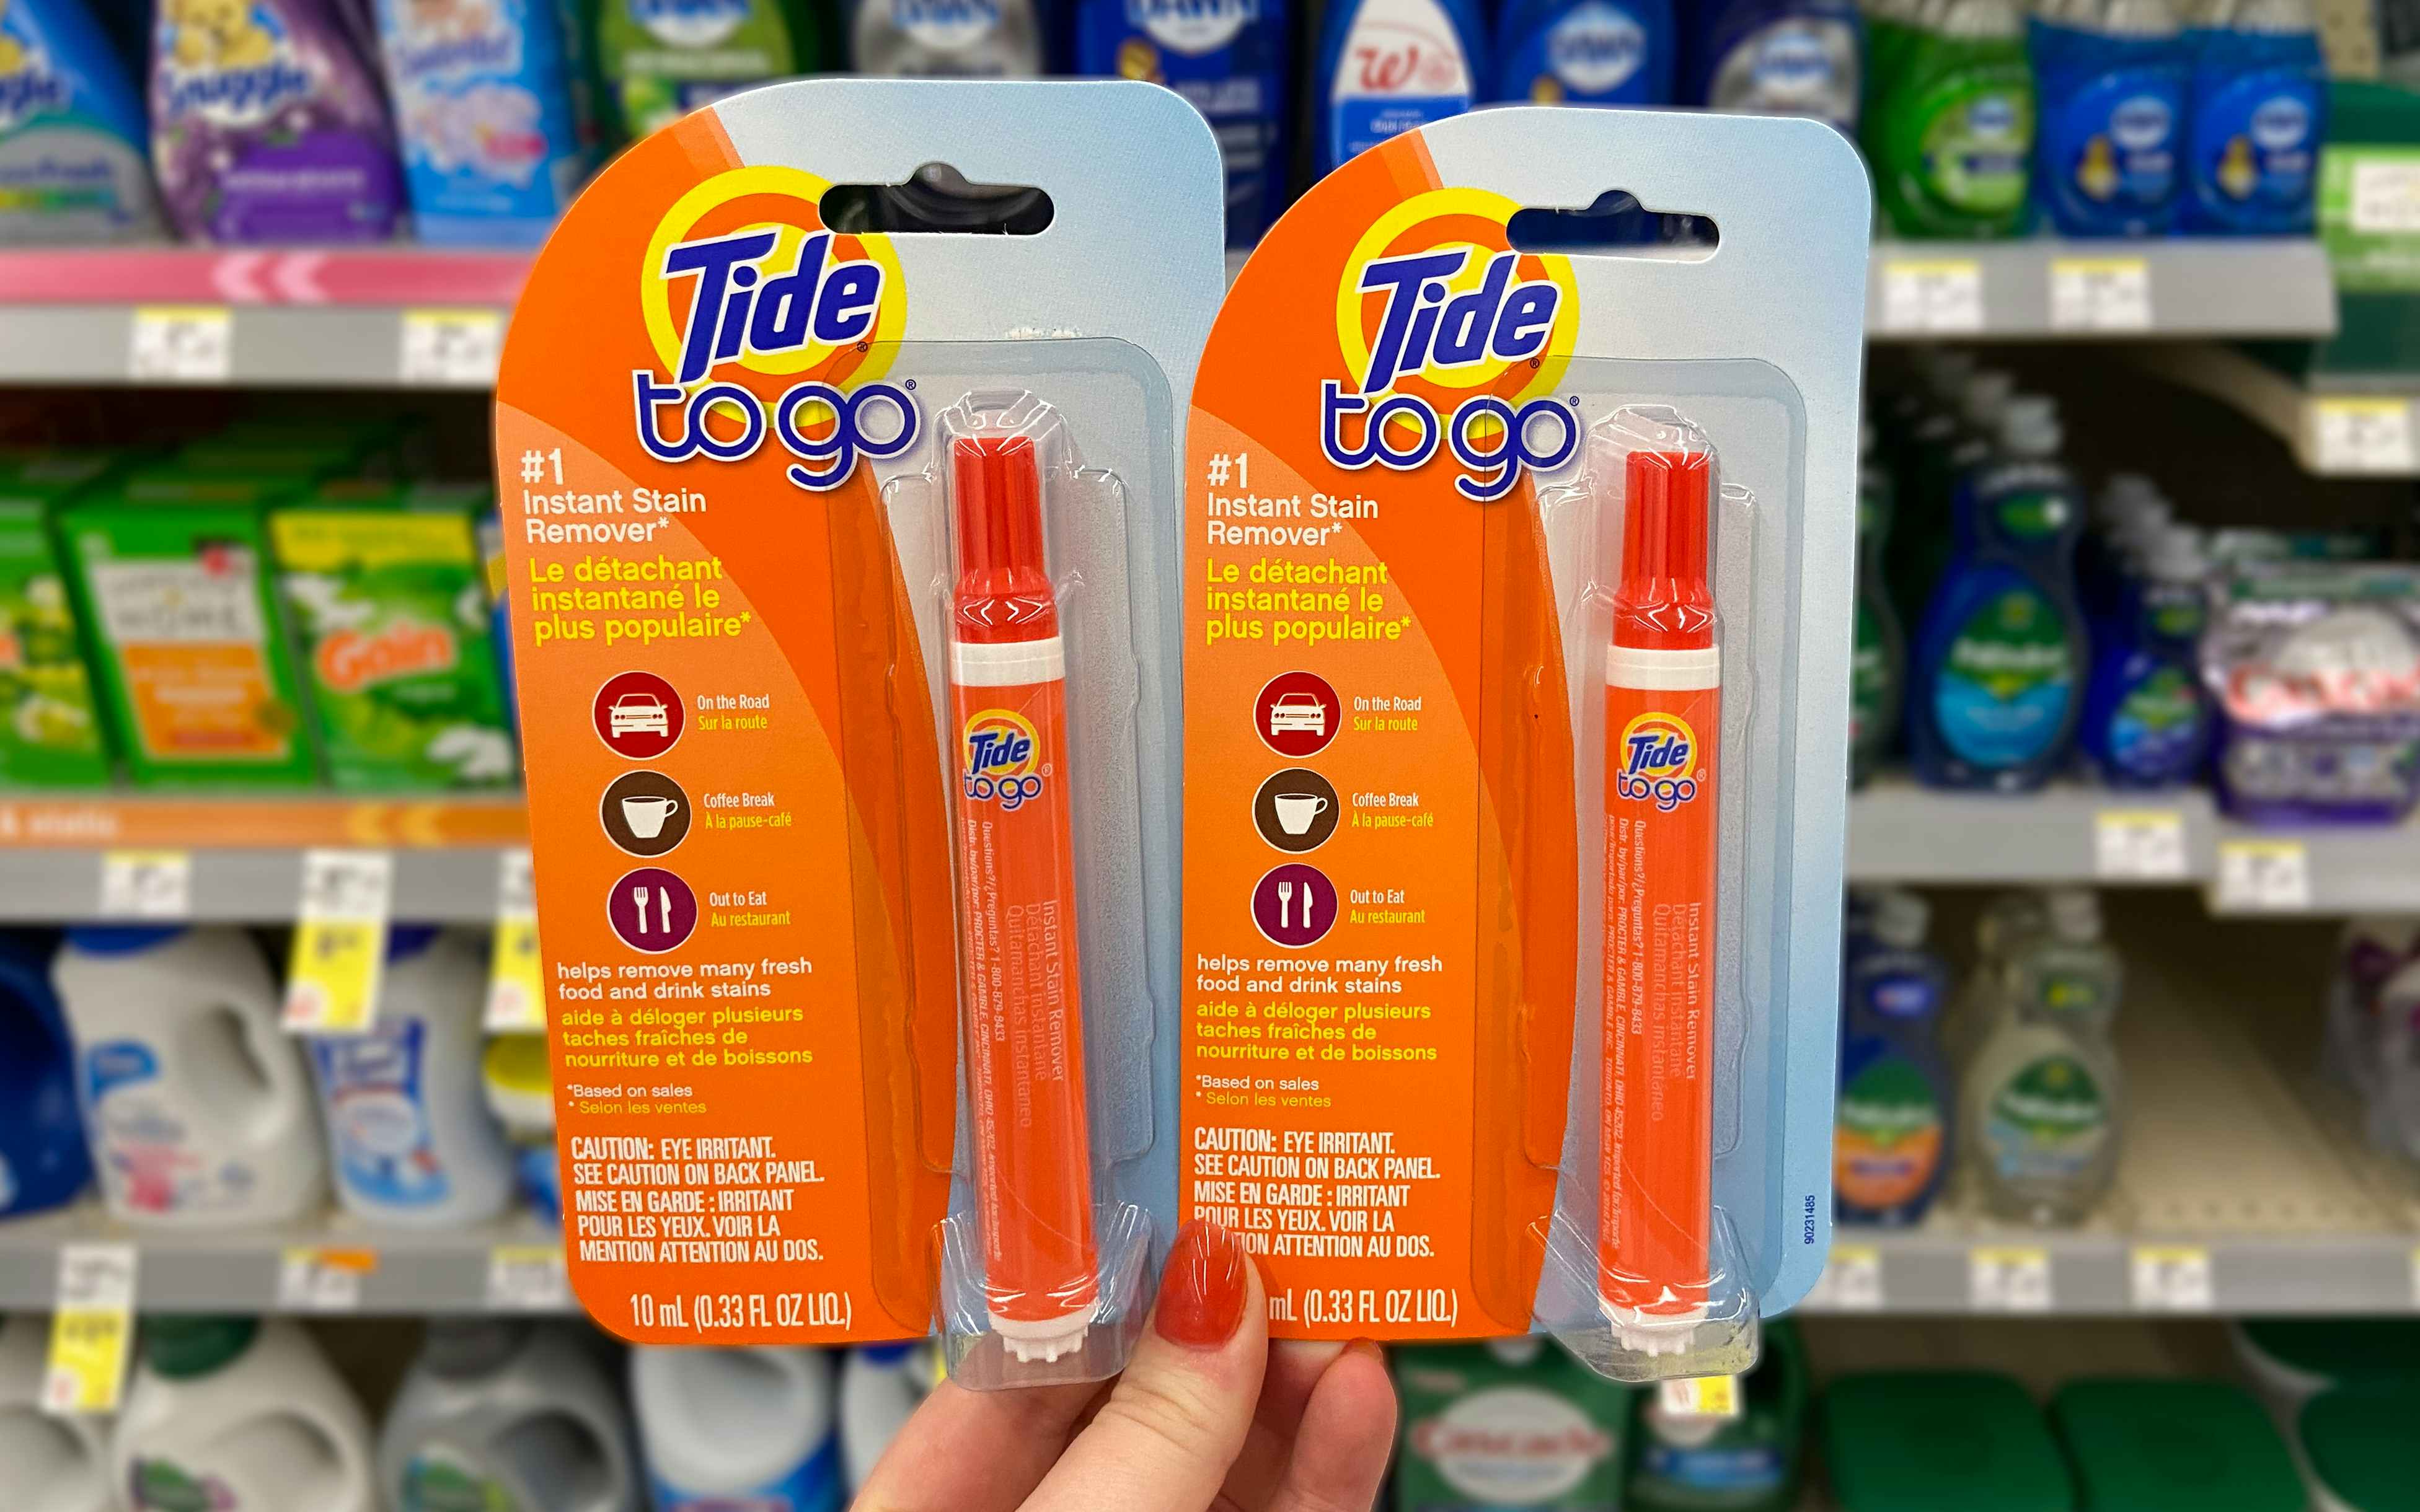 Tide Stain Remover Pen — Get 2 for $3.56 on Amazon (Reg. $10)